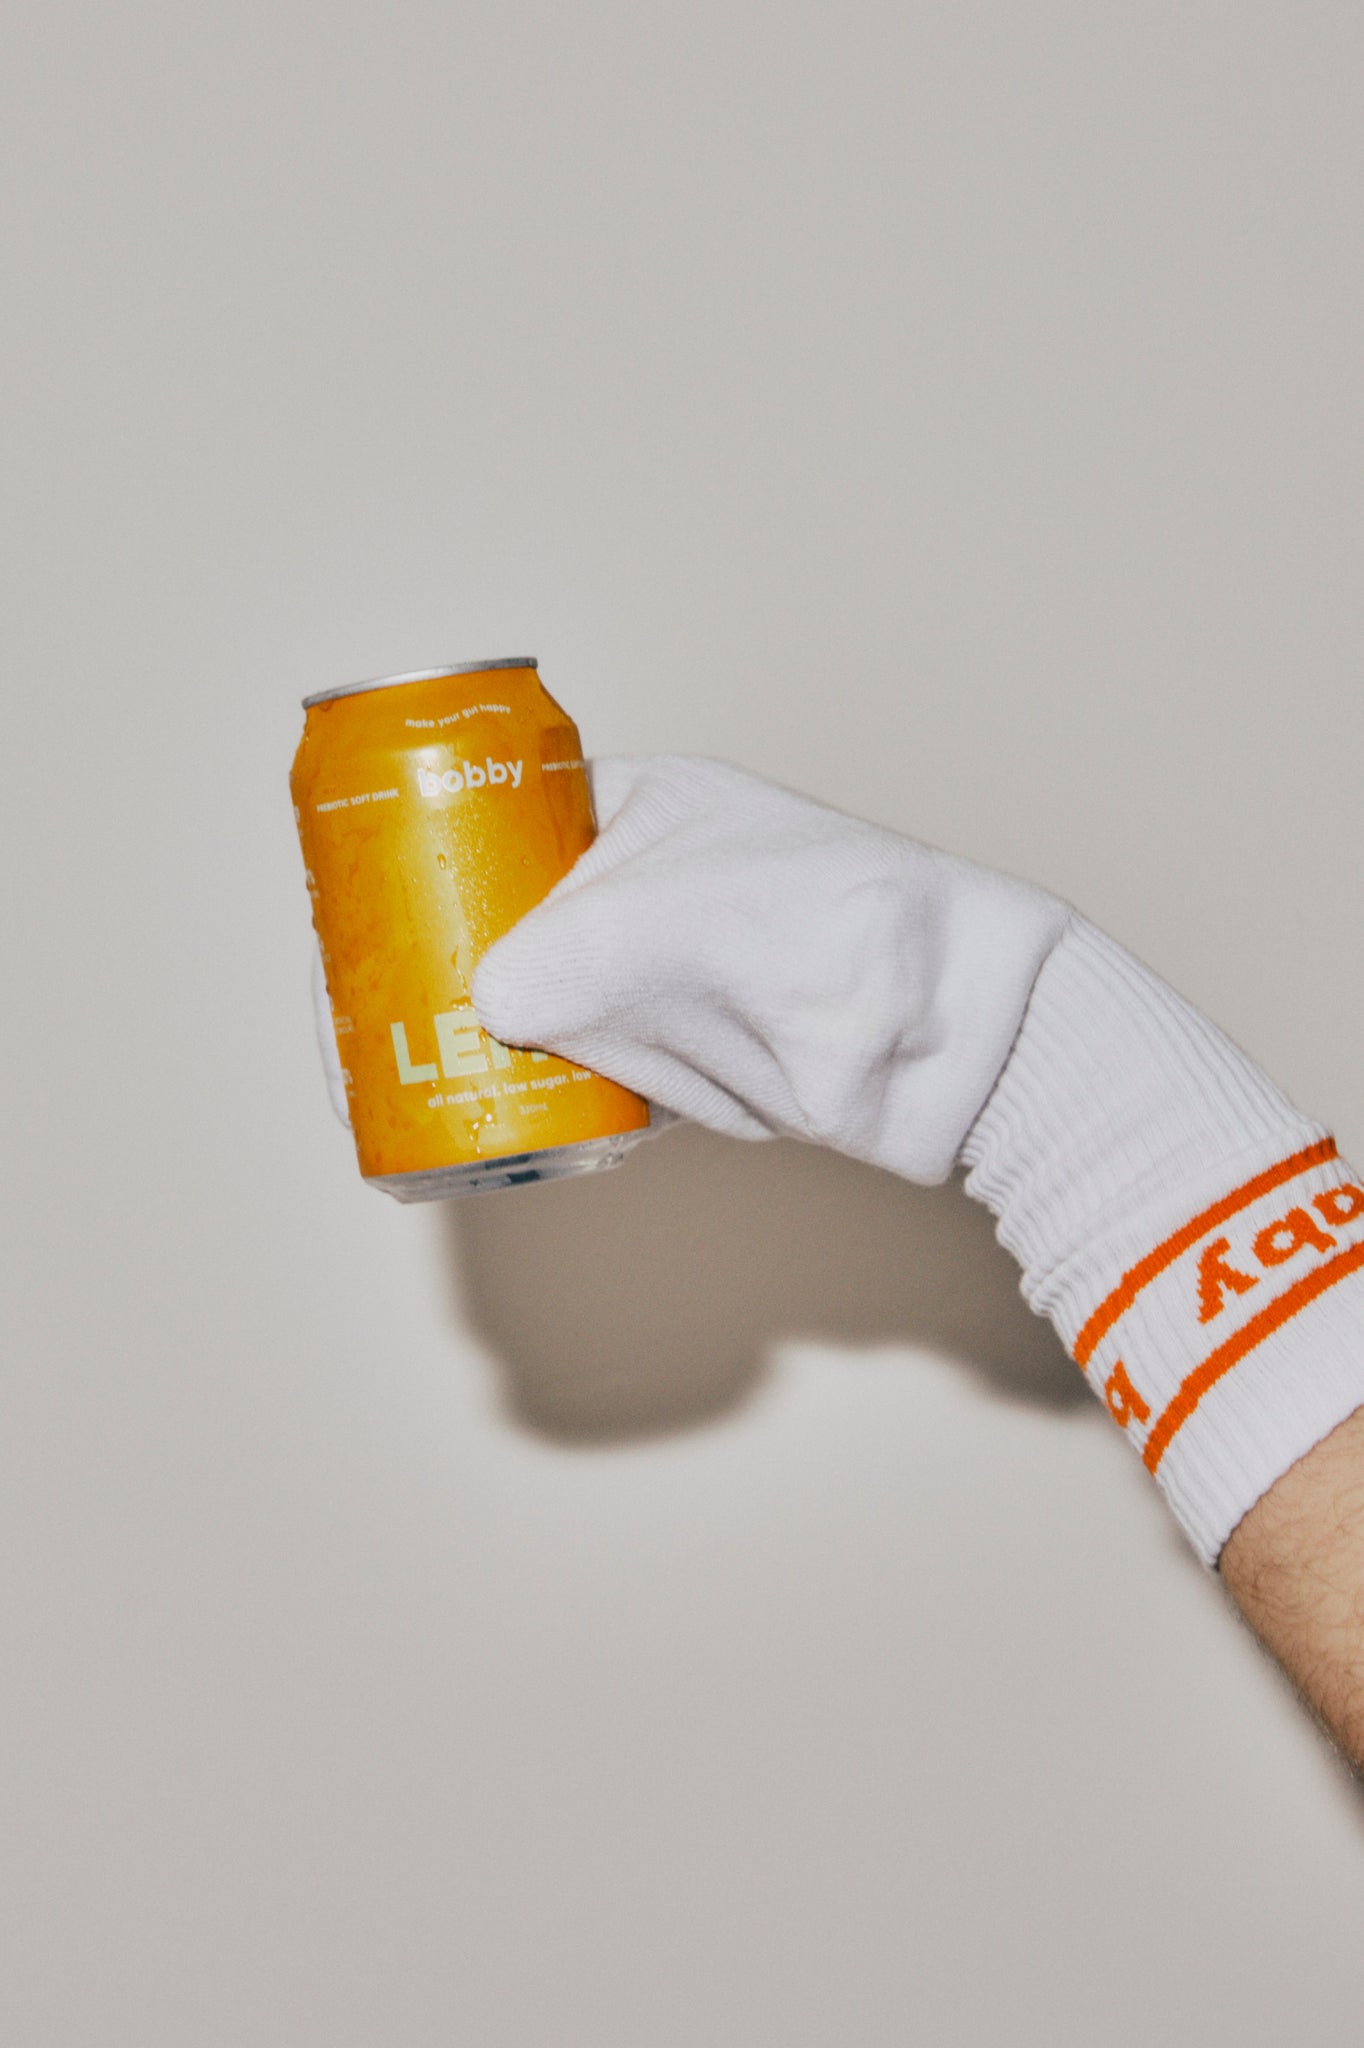 bobby branded socks with orange details on a hand, hand holding can of cold lemon bobby